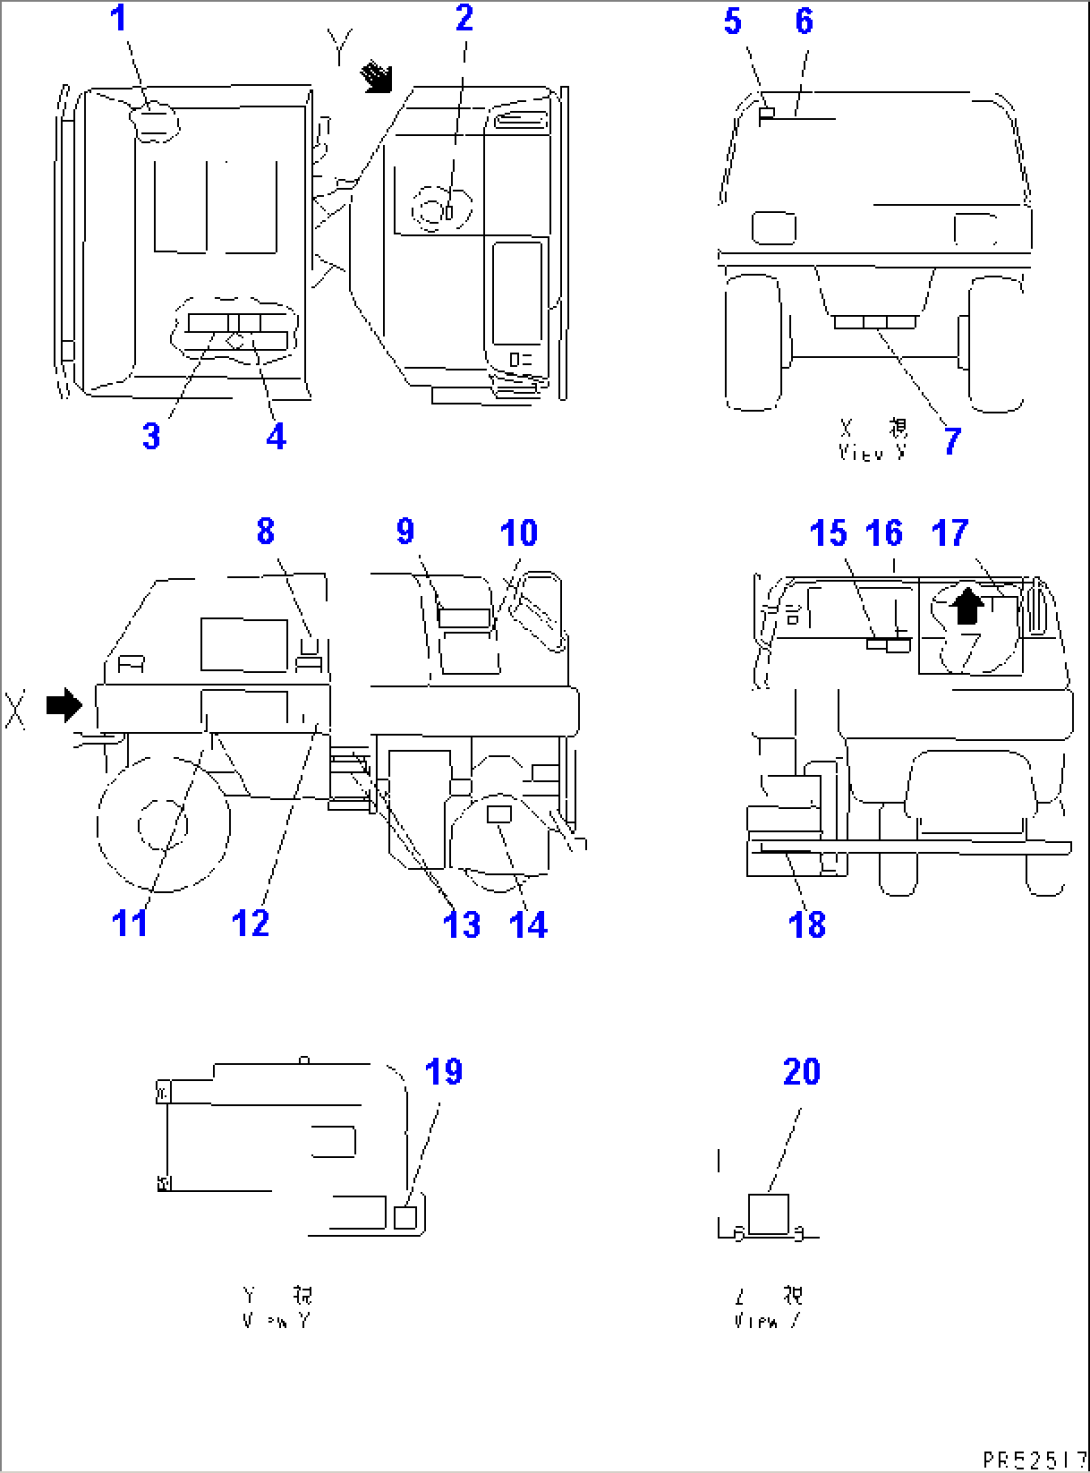 MARKS AND PLATES (JAPANESE)(#1001-1050)